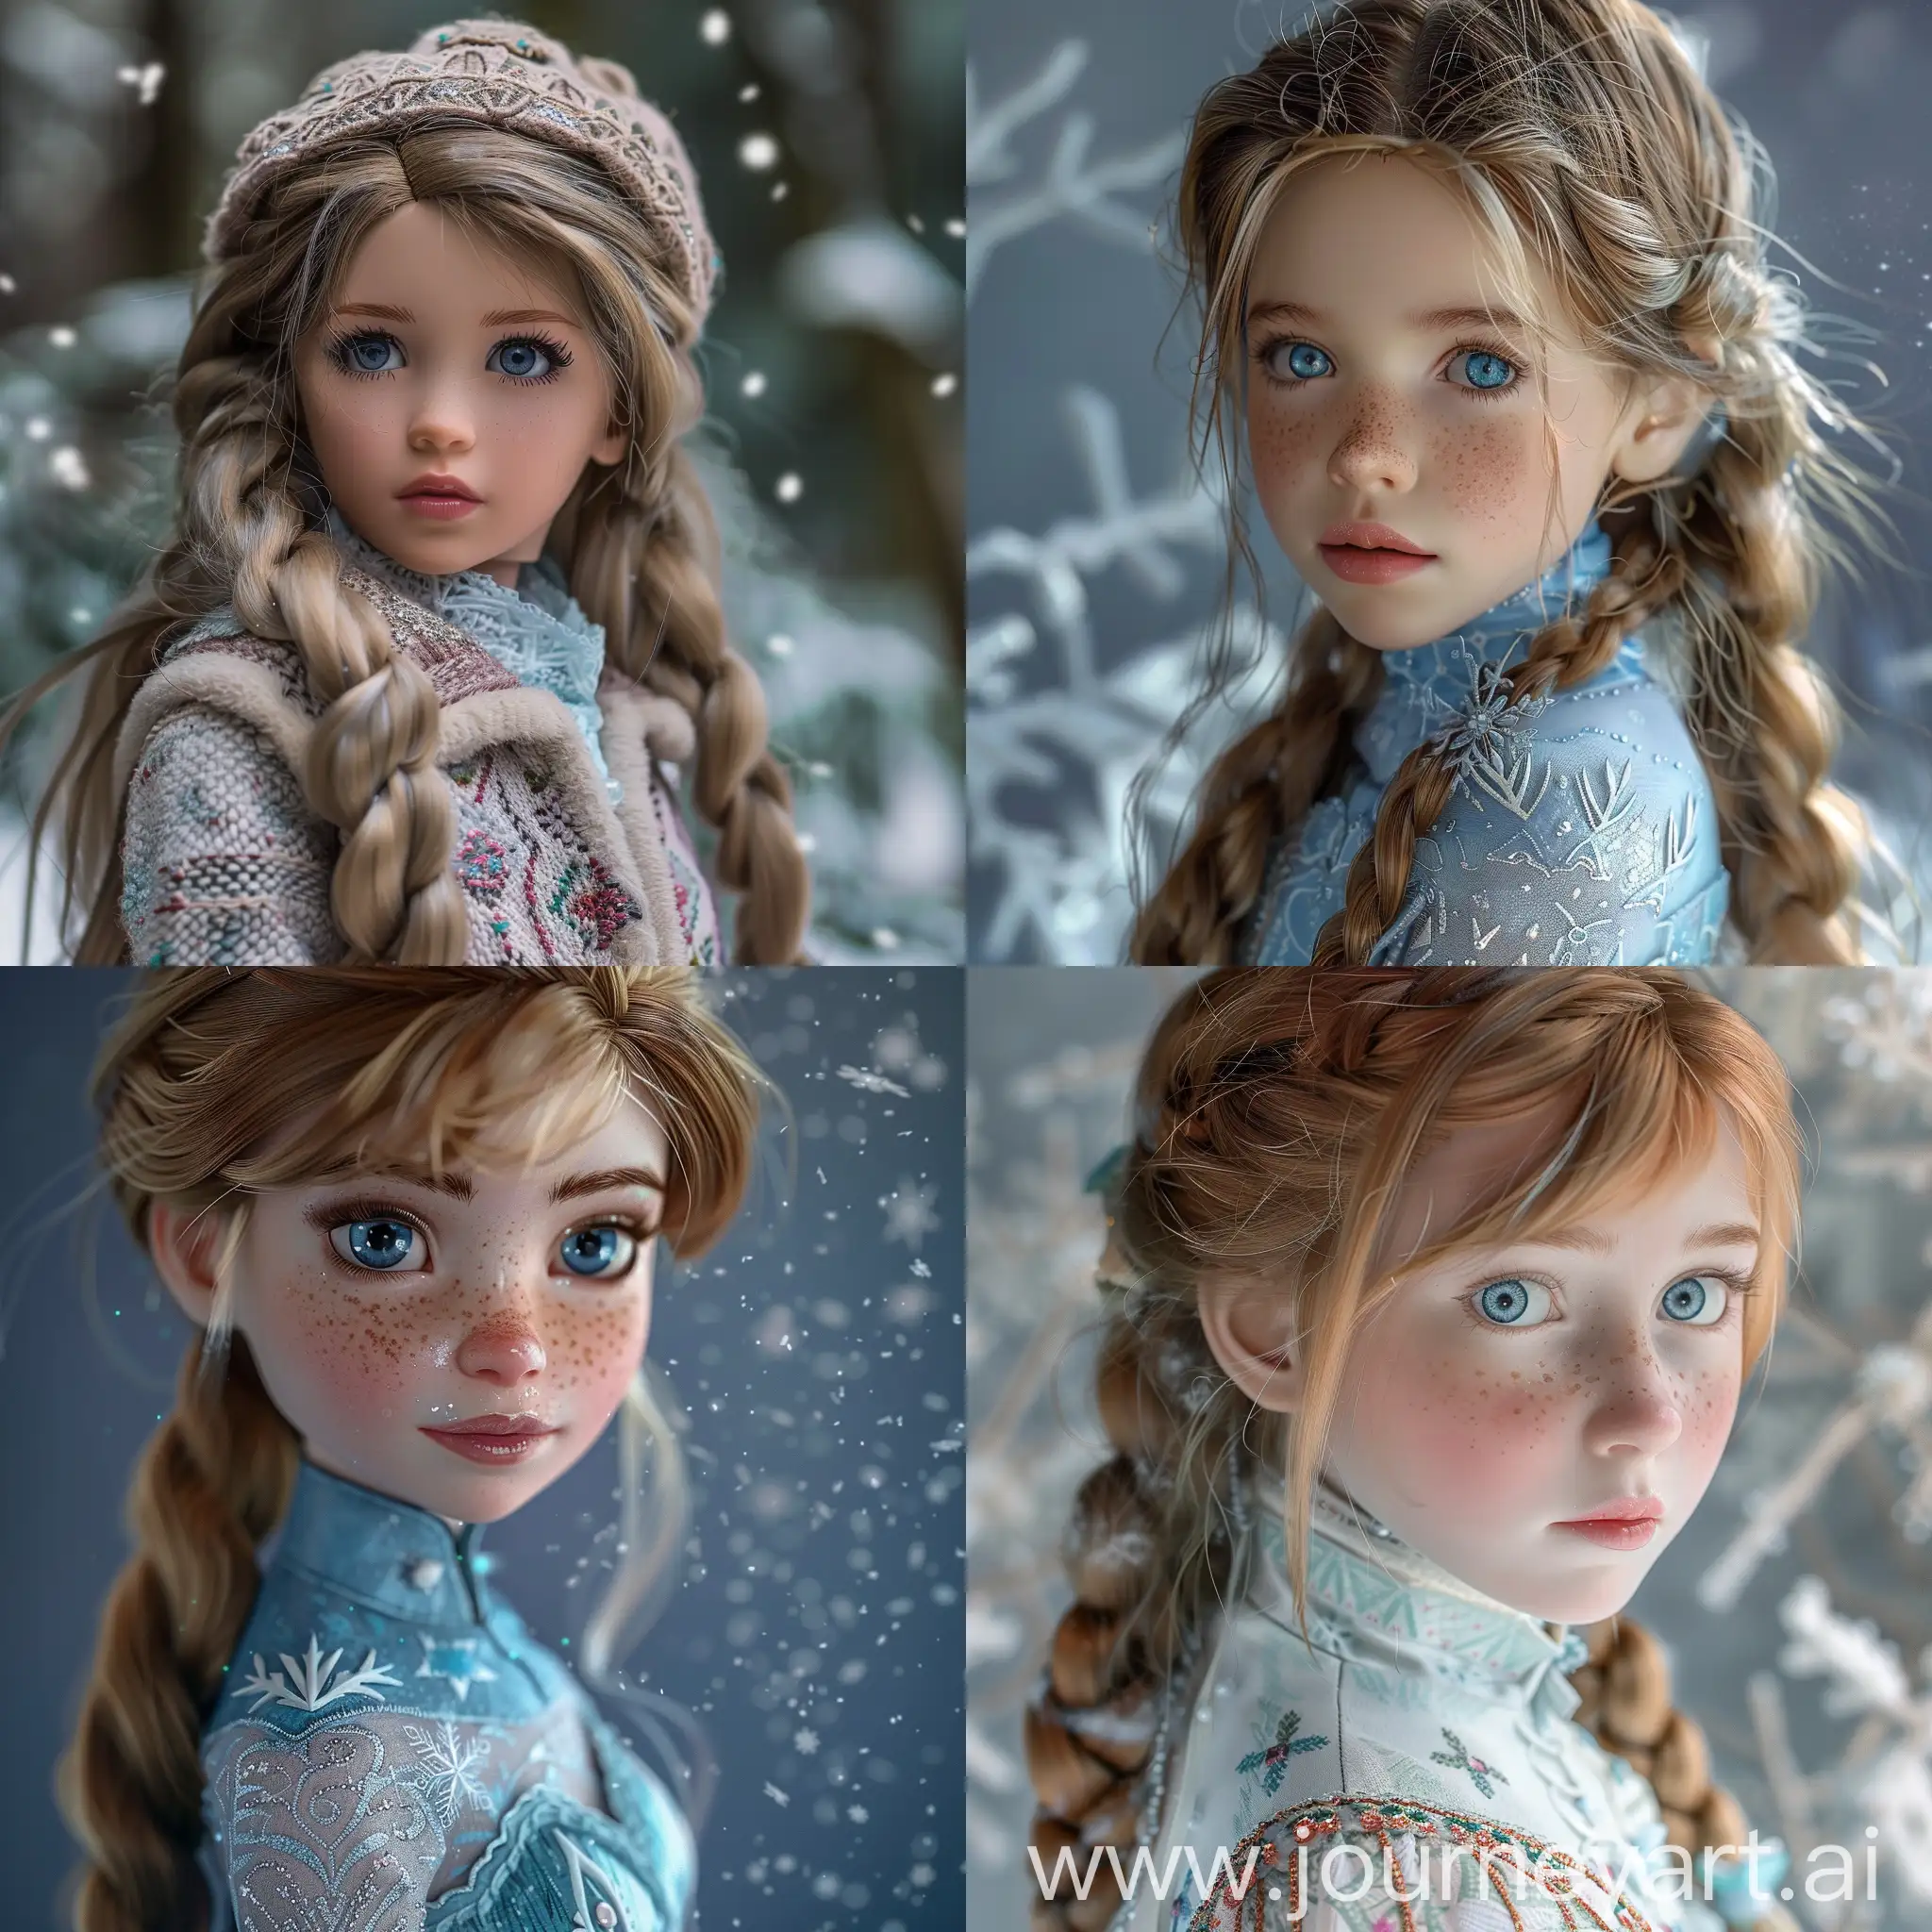 Hyper-Realistic-10YearOld-Girl-in-Barbie-and-Frozen-Costume-UltraDetailed-Full-Body-Shot